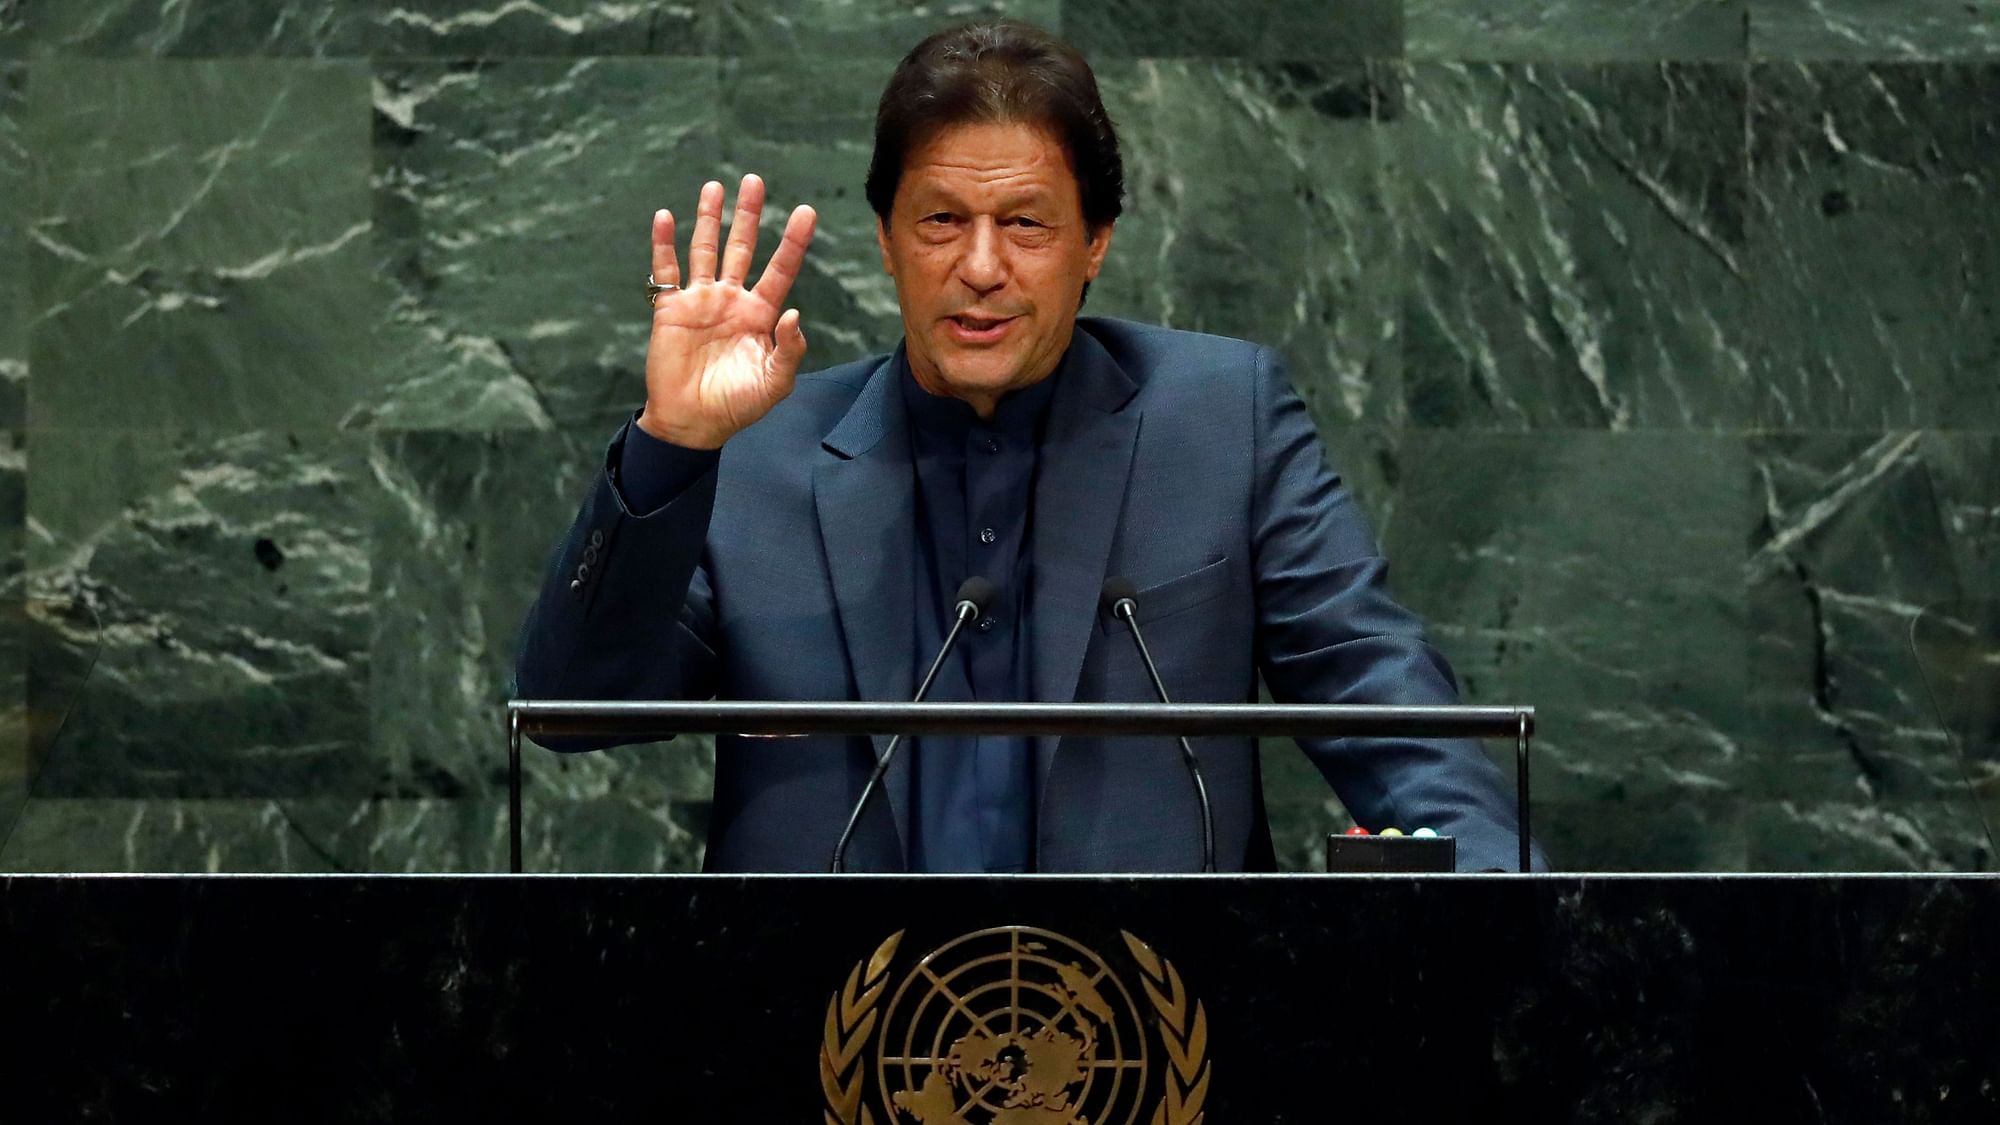 Pakistan PM Imran Khan addresses the 74th session of the United Nations General Assembly on 27 September. &nbsp;